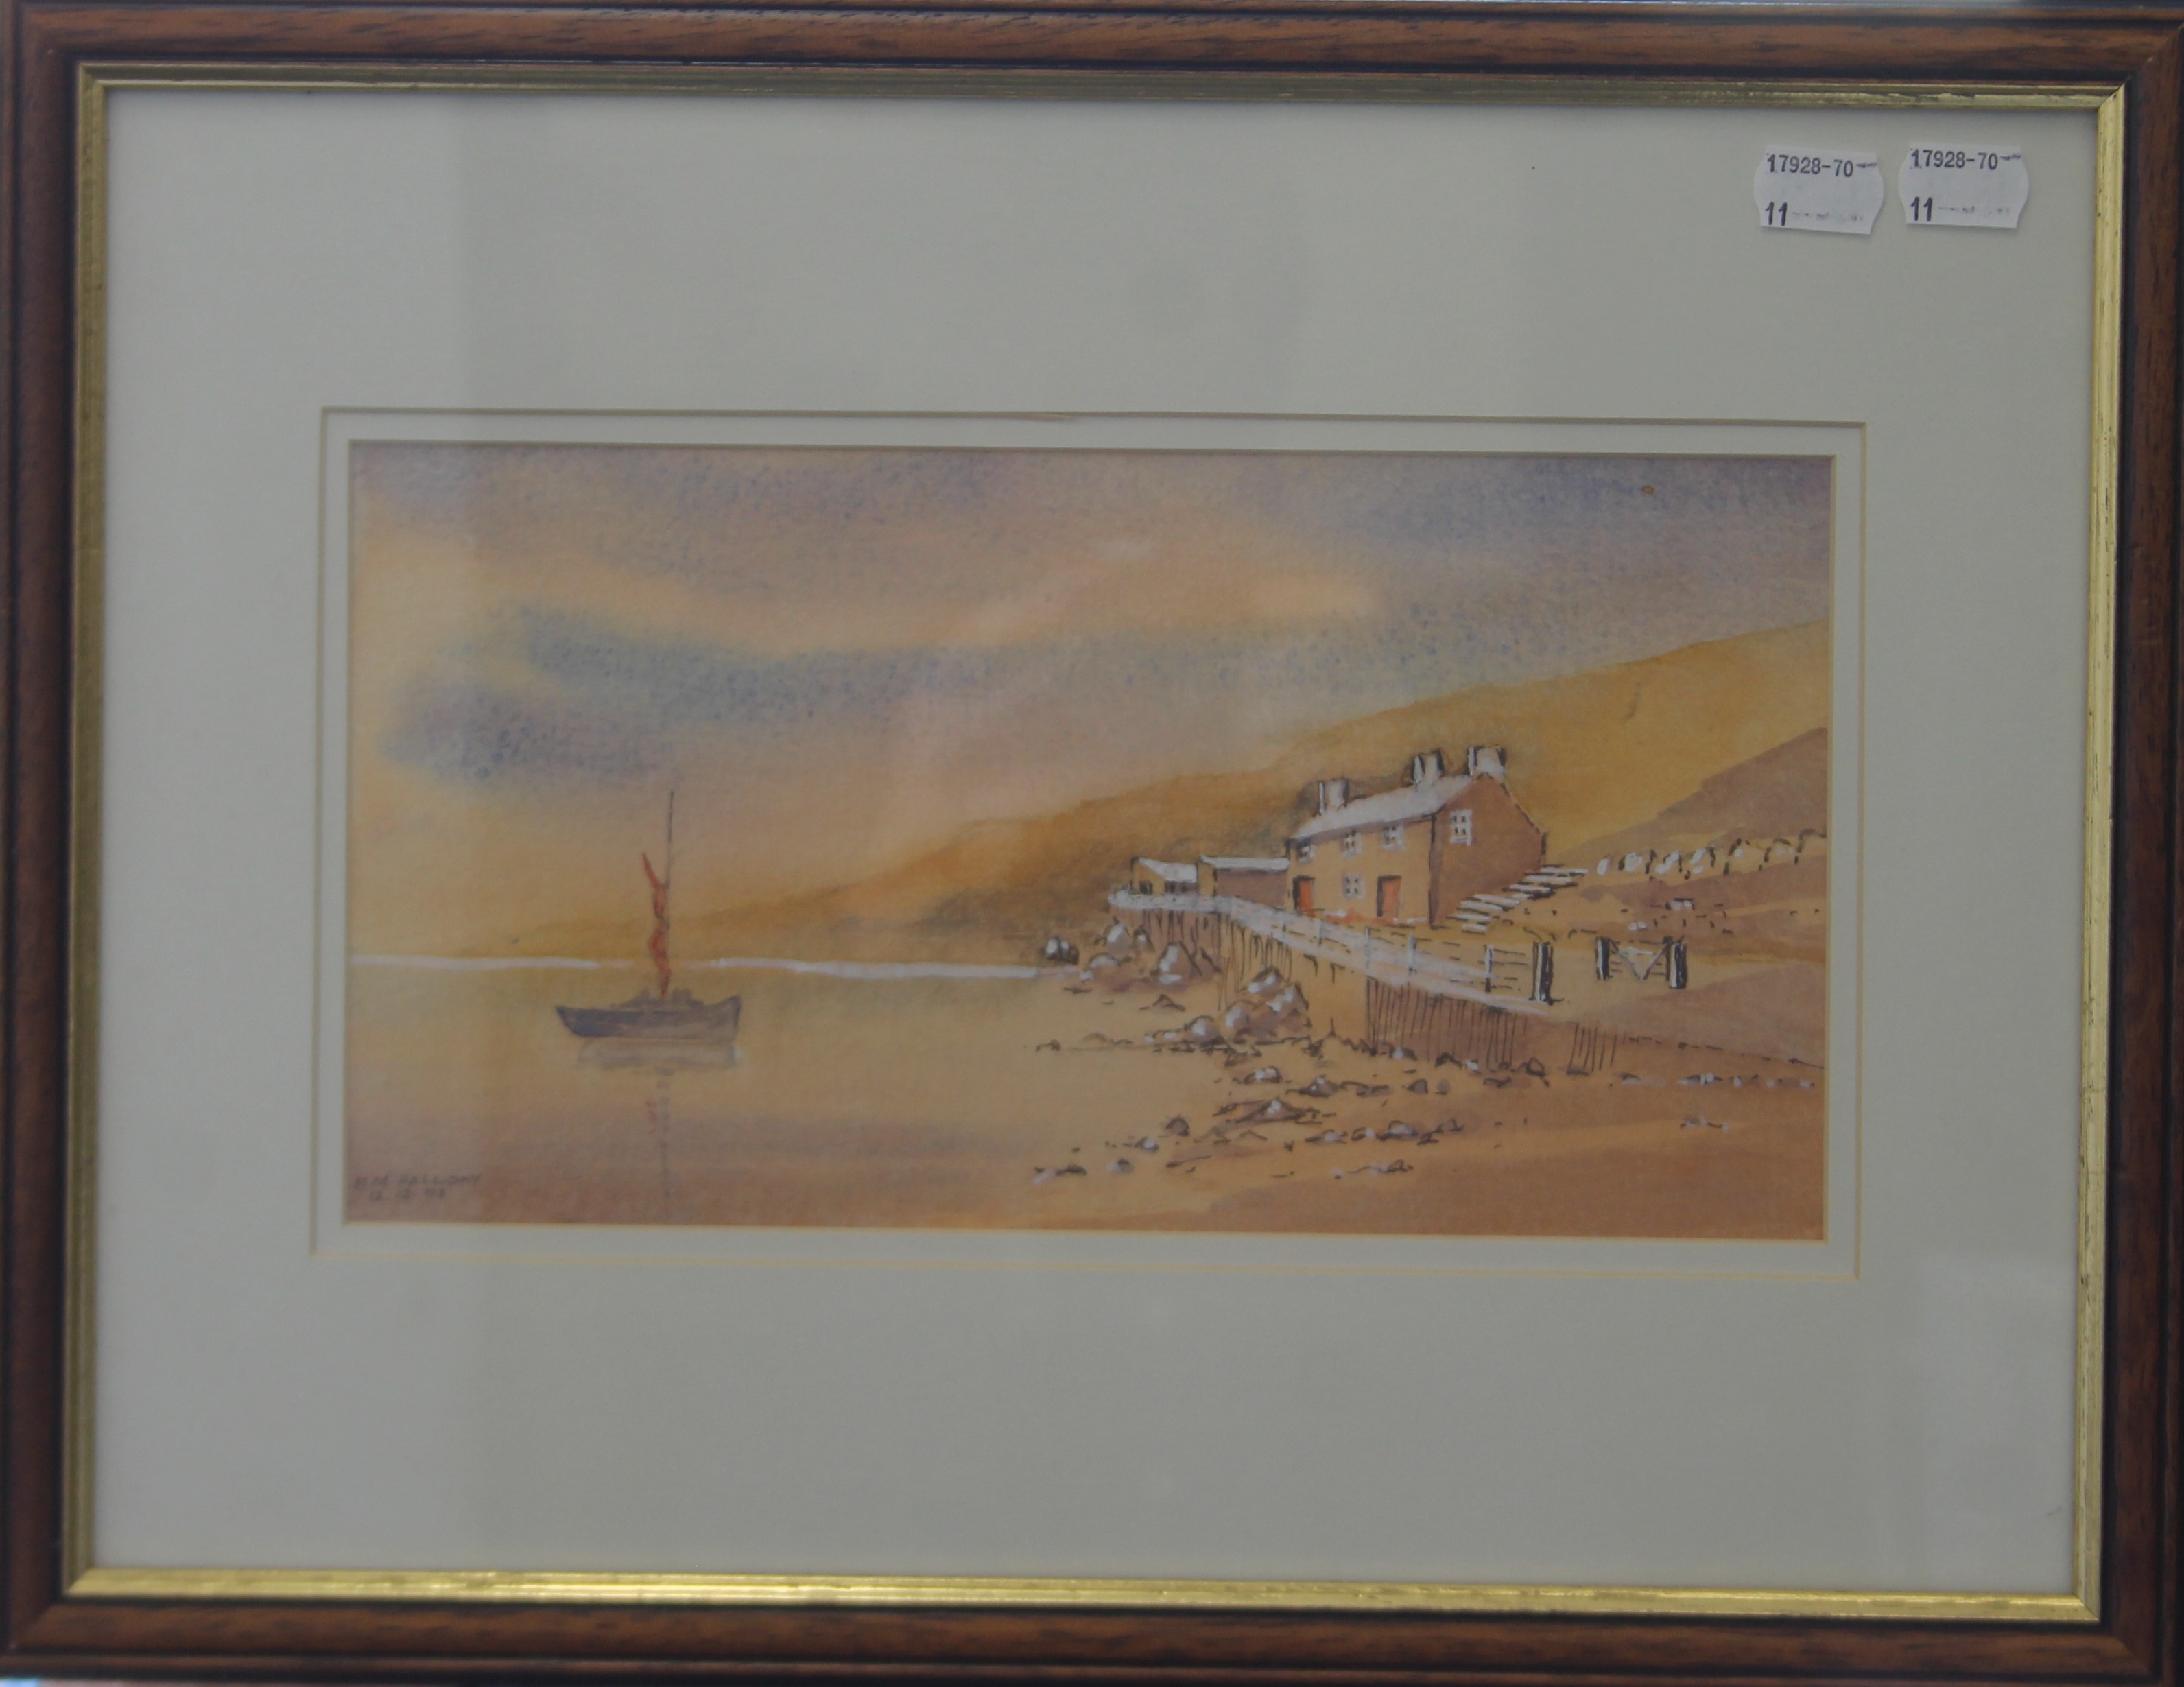 H M HALLIDAY, Coastal Scene, watercolour, signed and dated 12.12.03, framed and glazed. 29.5 x 15. - Image 2 of 3